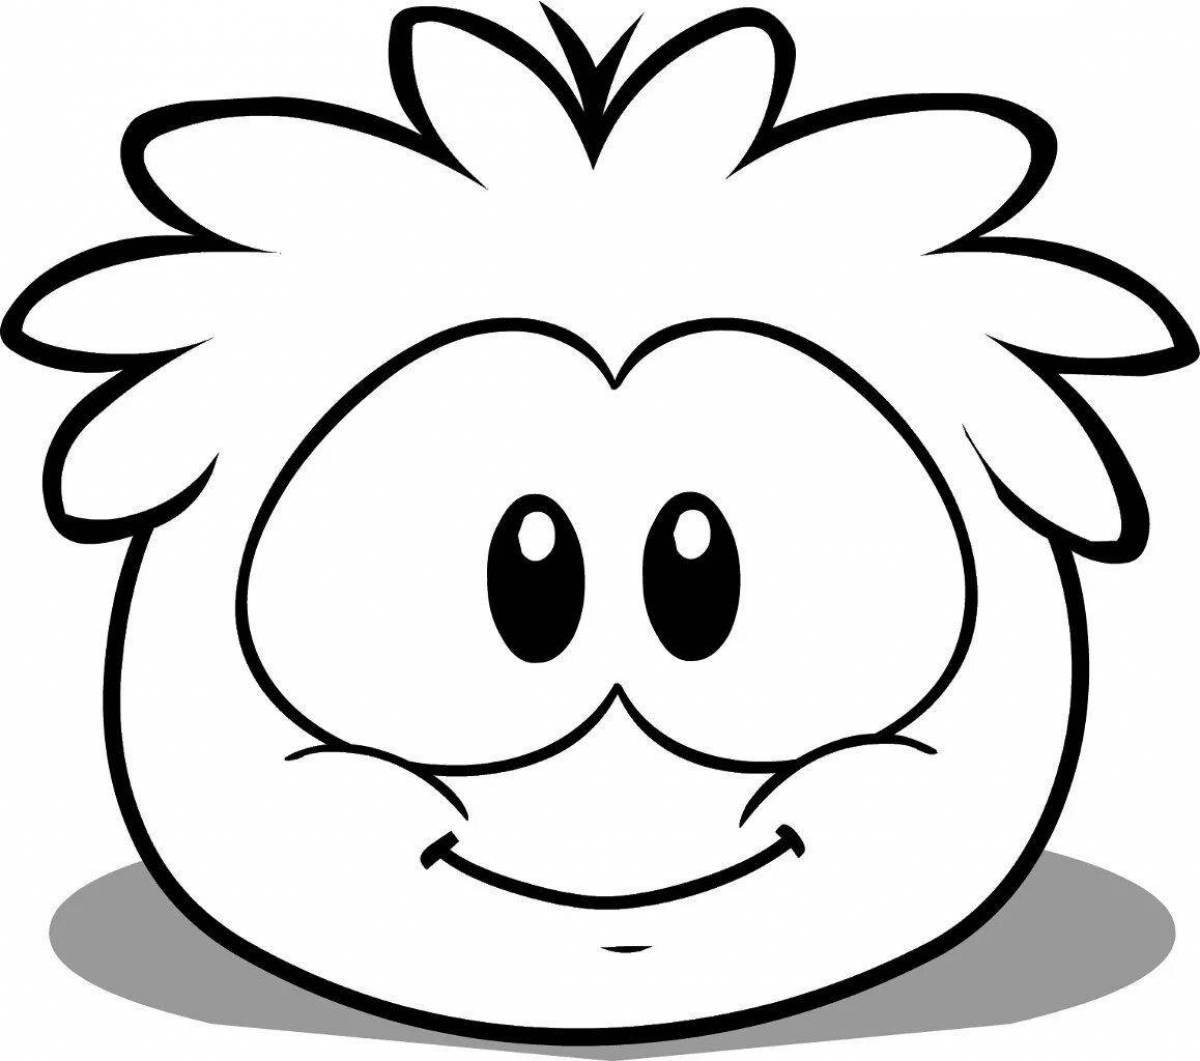 Jocular coloring page emoticons funny